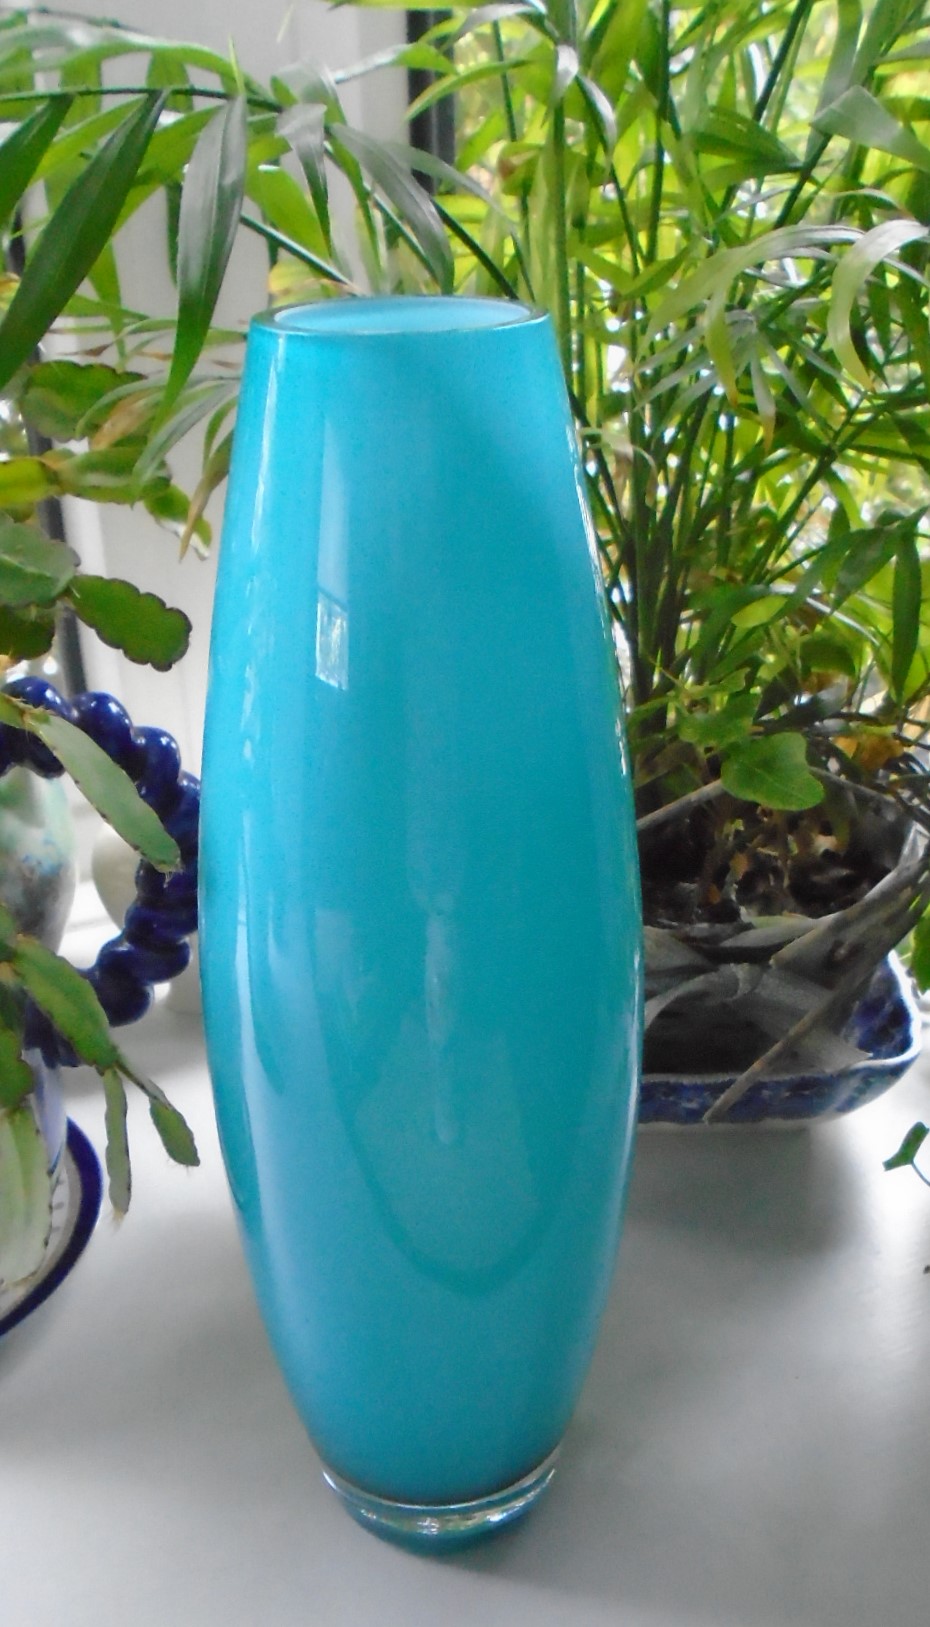 Superb 30mm tall Villeroy&Boch Kima Vase in the Caribbean Sea Colourway. 